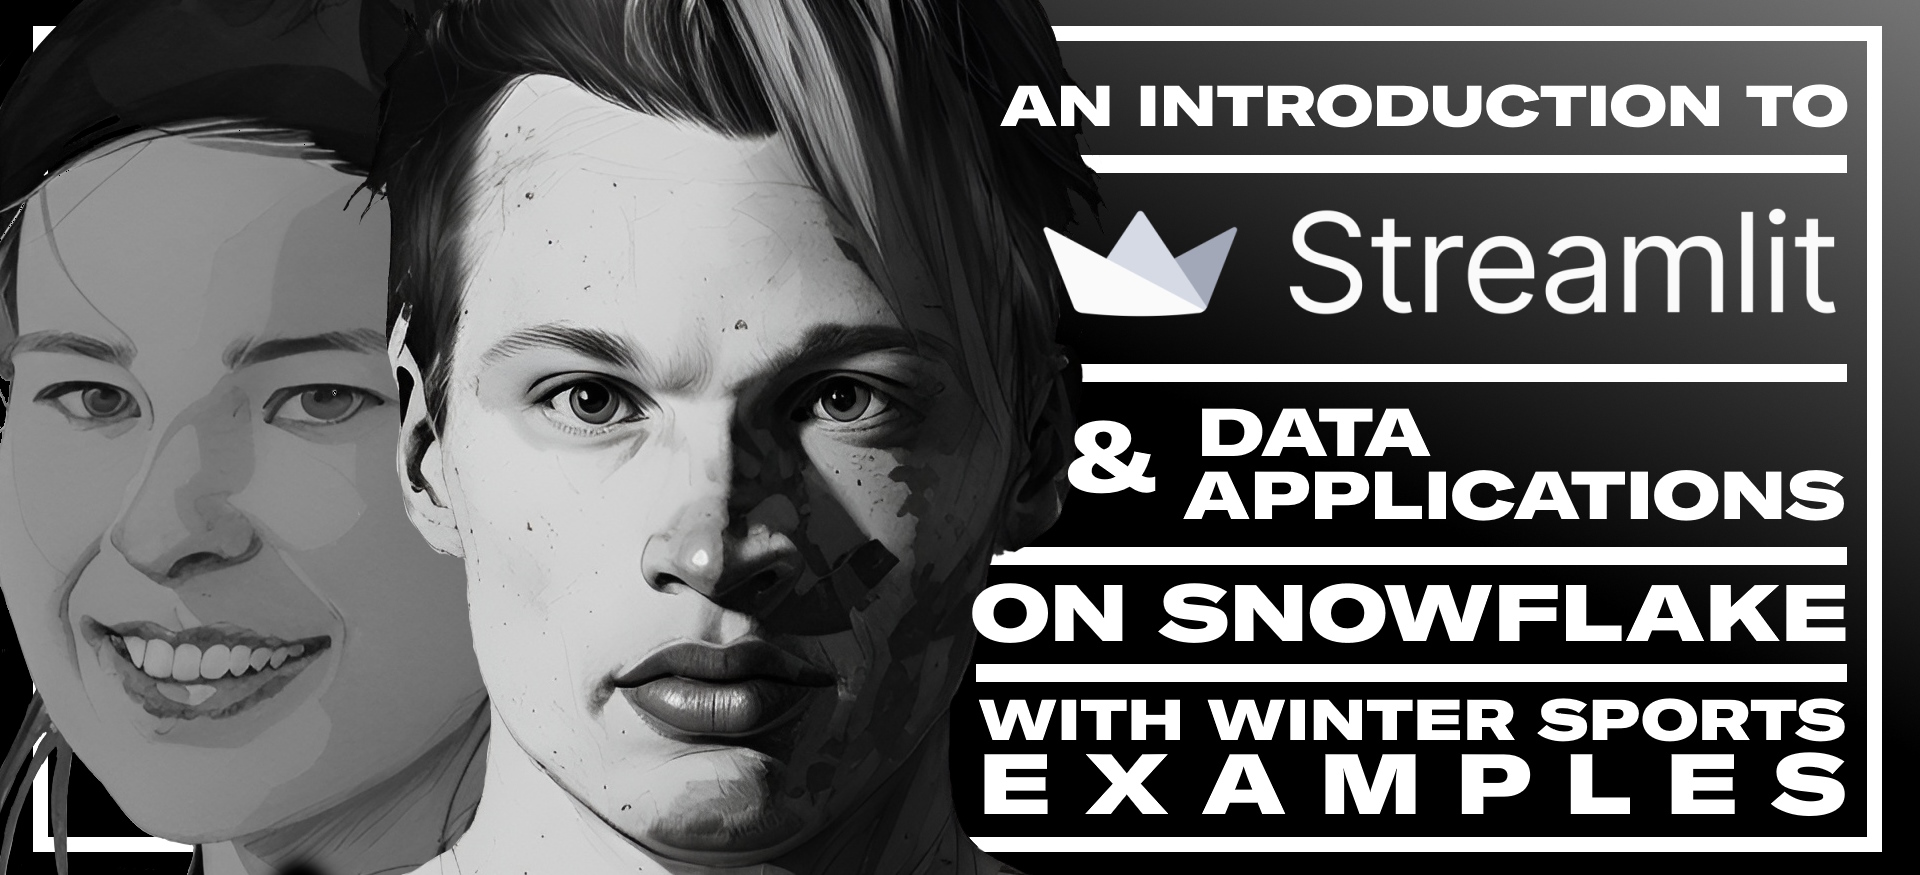 Introduction to Streamlit and Data Applications on Snowflake with Winter Sports examples